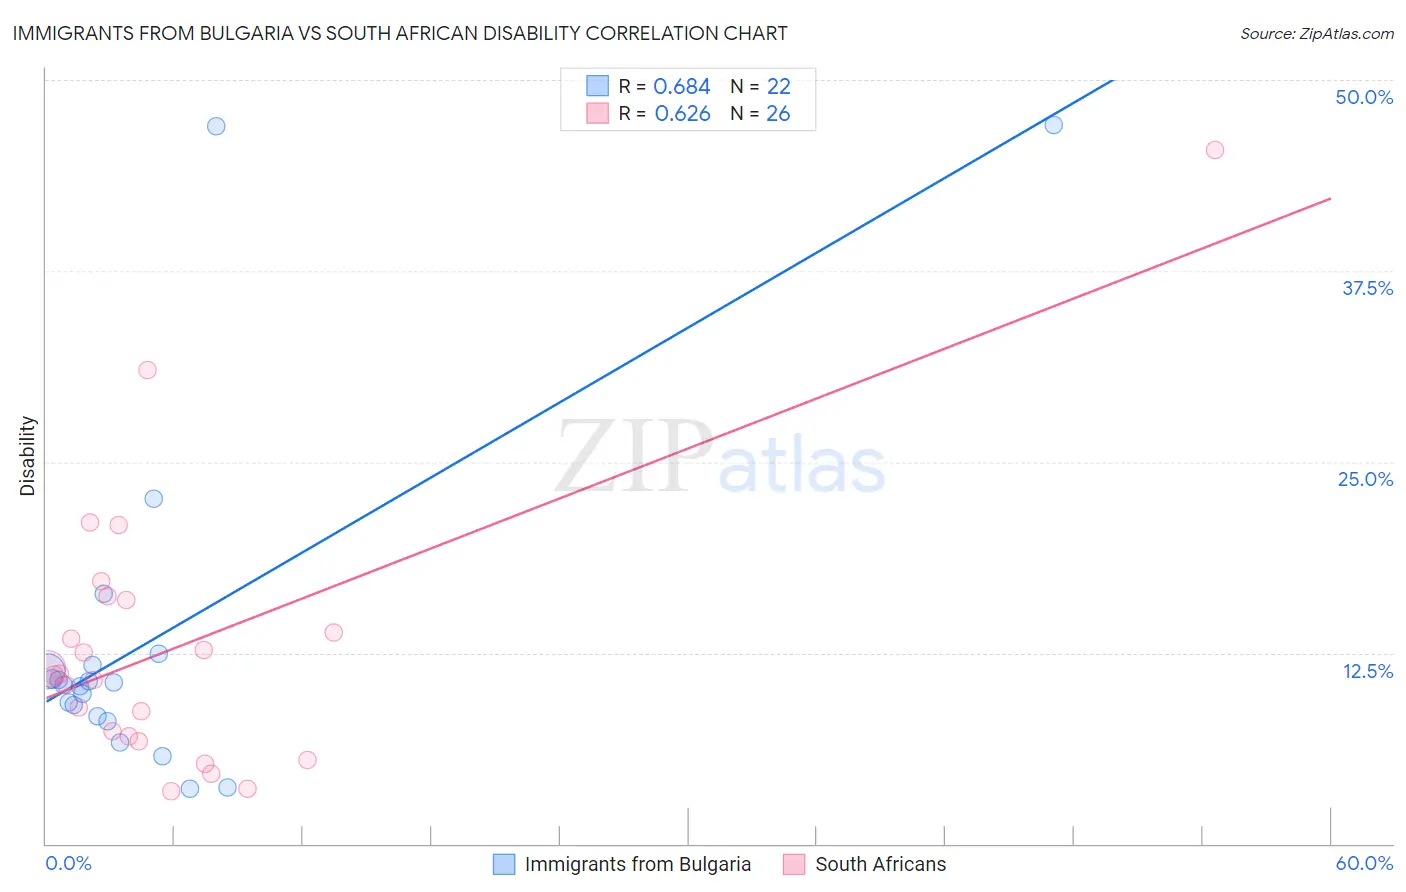 Immigrants from Bulgaria vs South African Disability